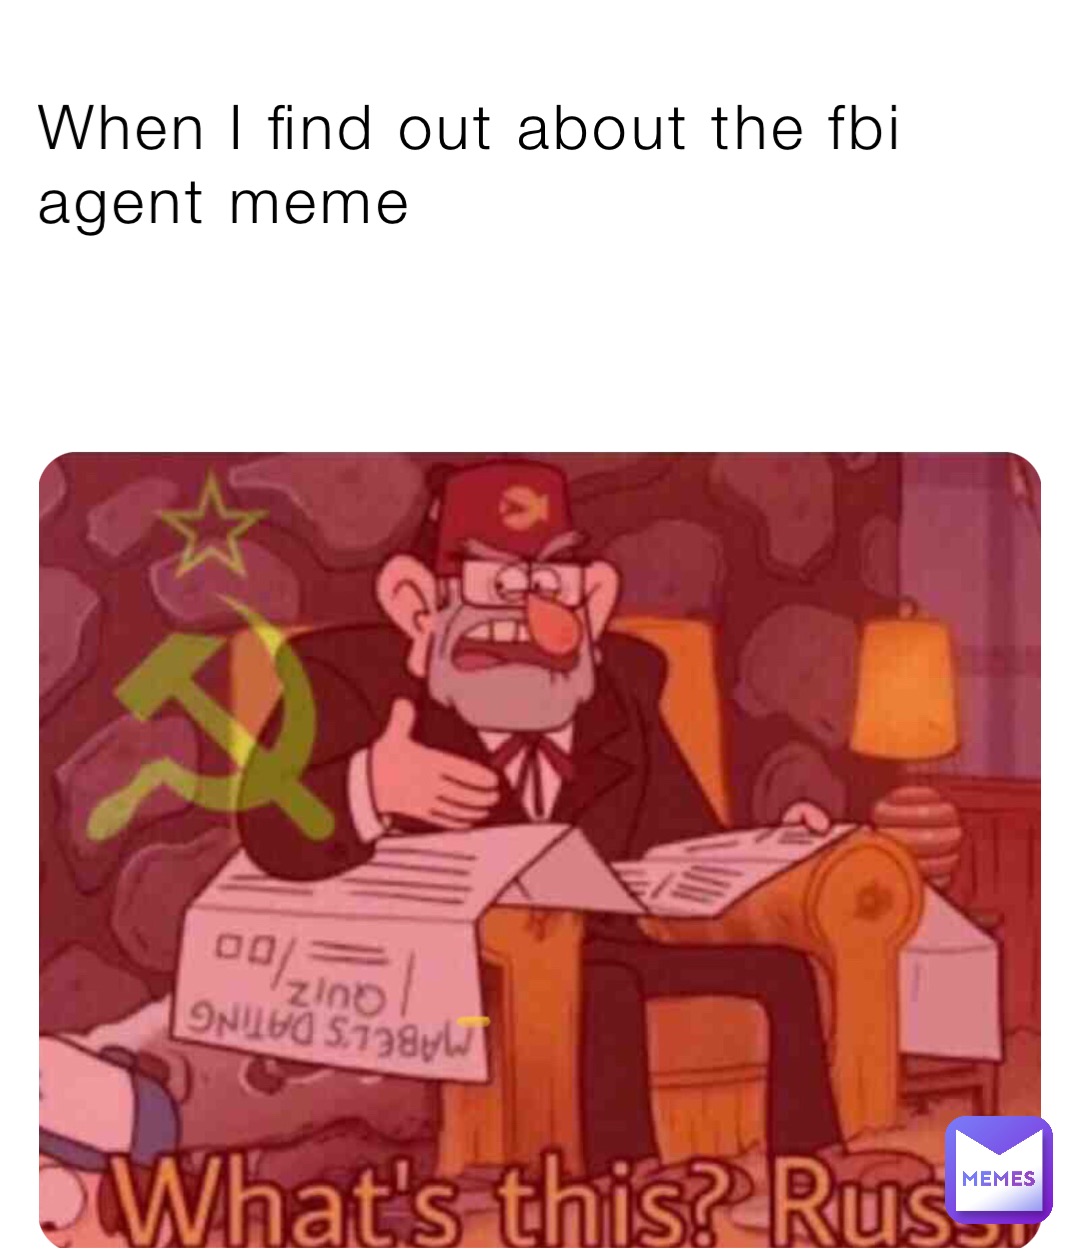 When I find out about the fbi agent meme